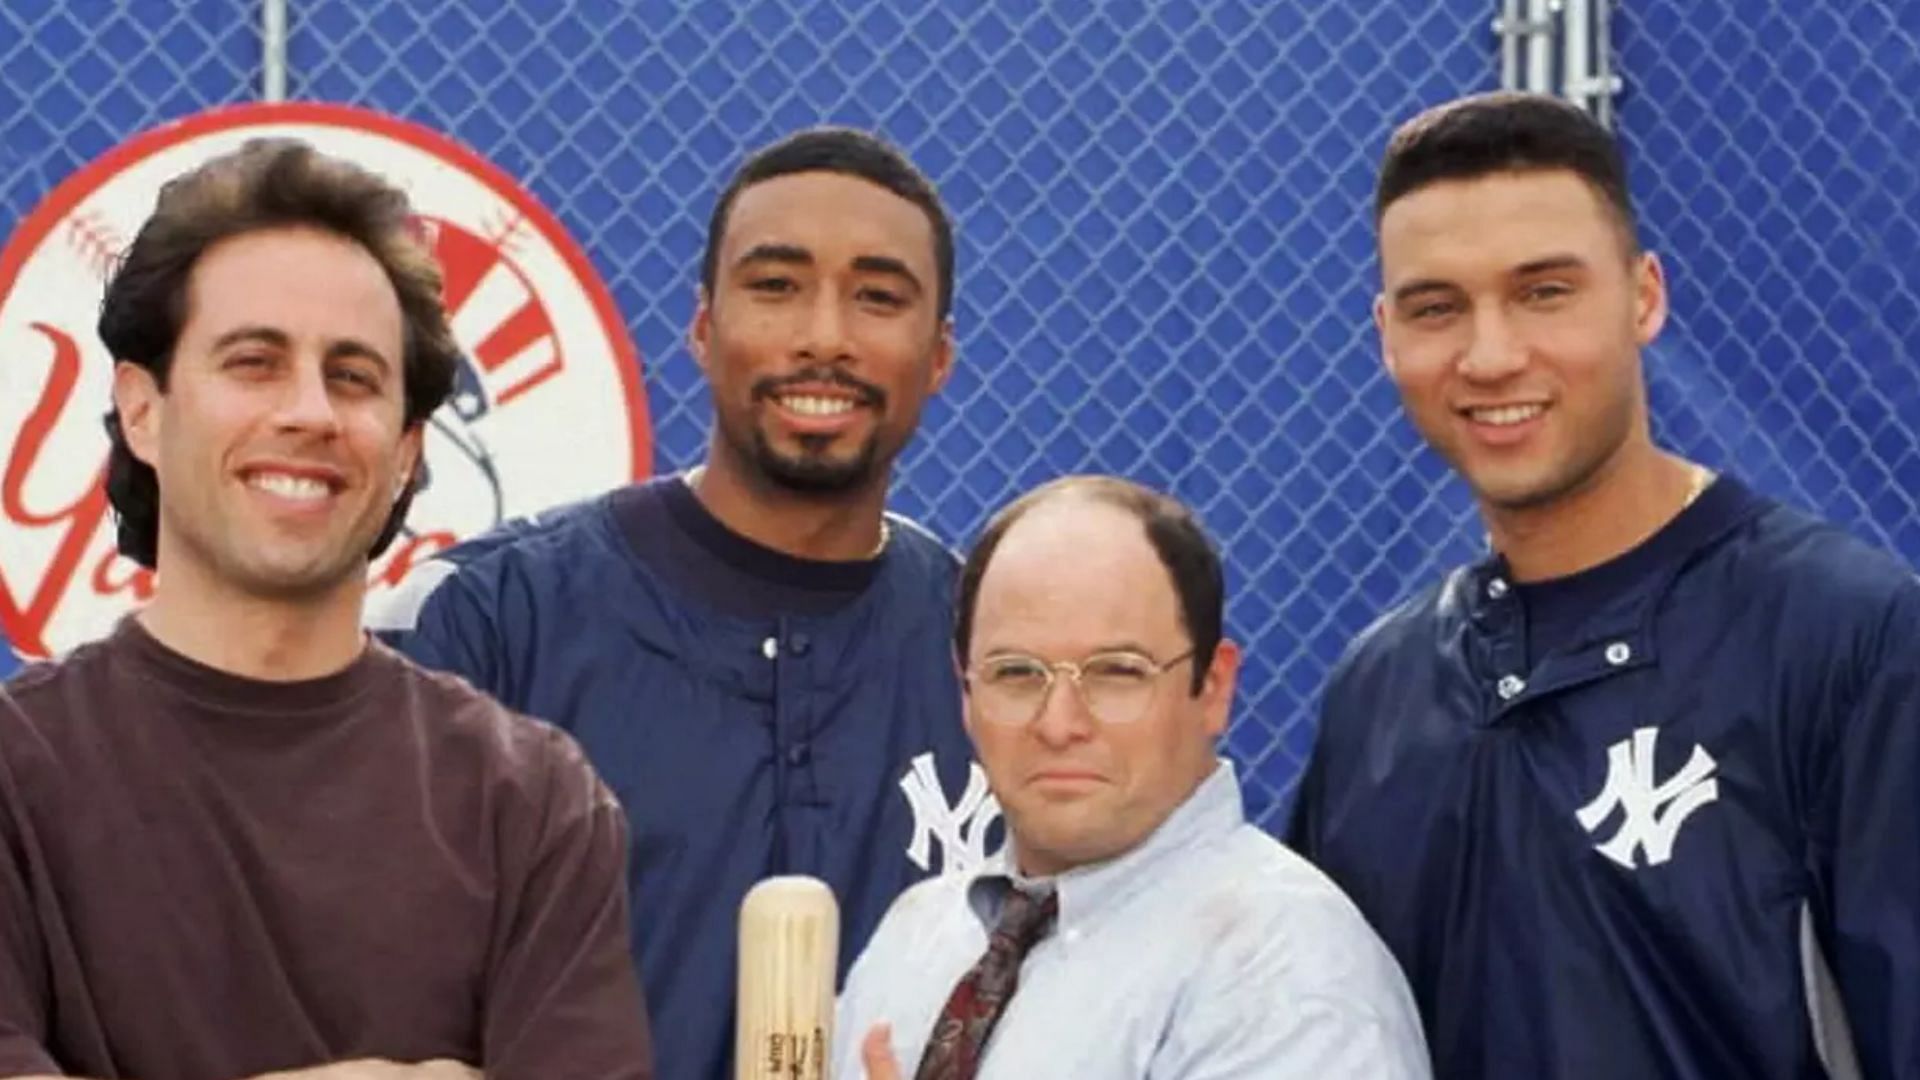 Hitting, it's not about muscle - Derek Jeter and Bernie Williams  receive batting tips from George Costanza in a hilarious clip from Seinfeld